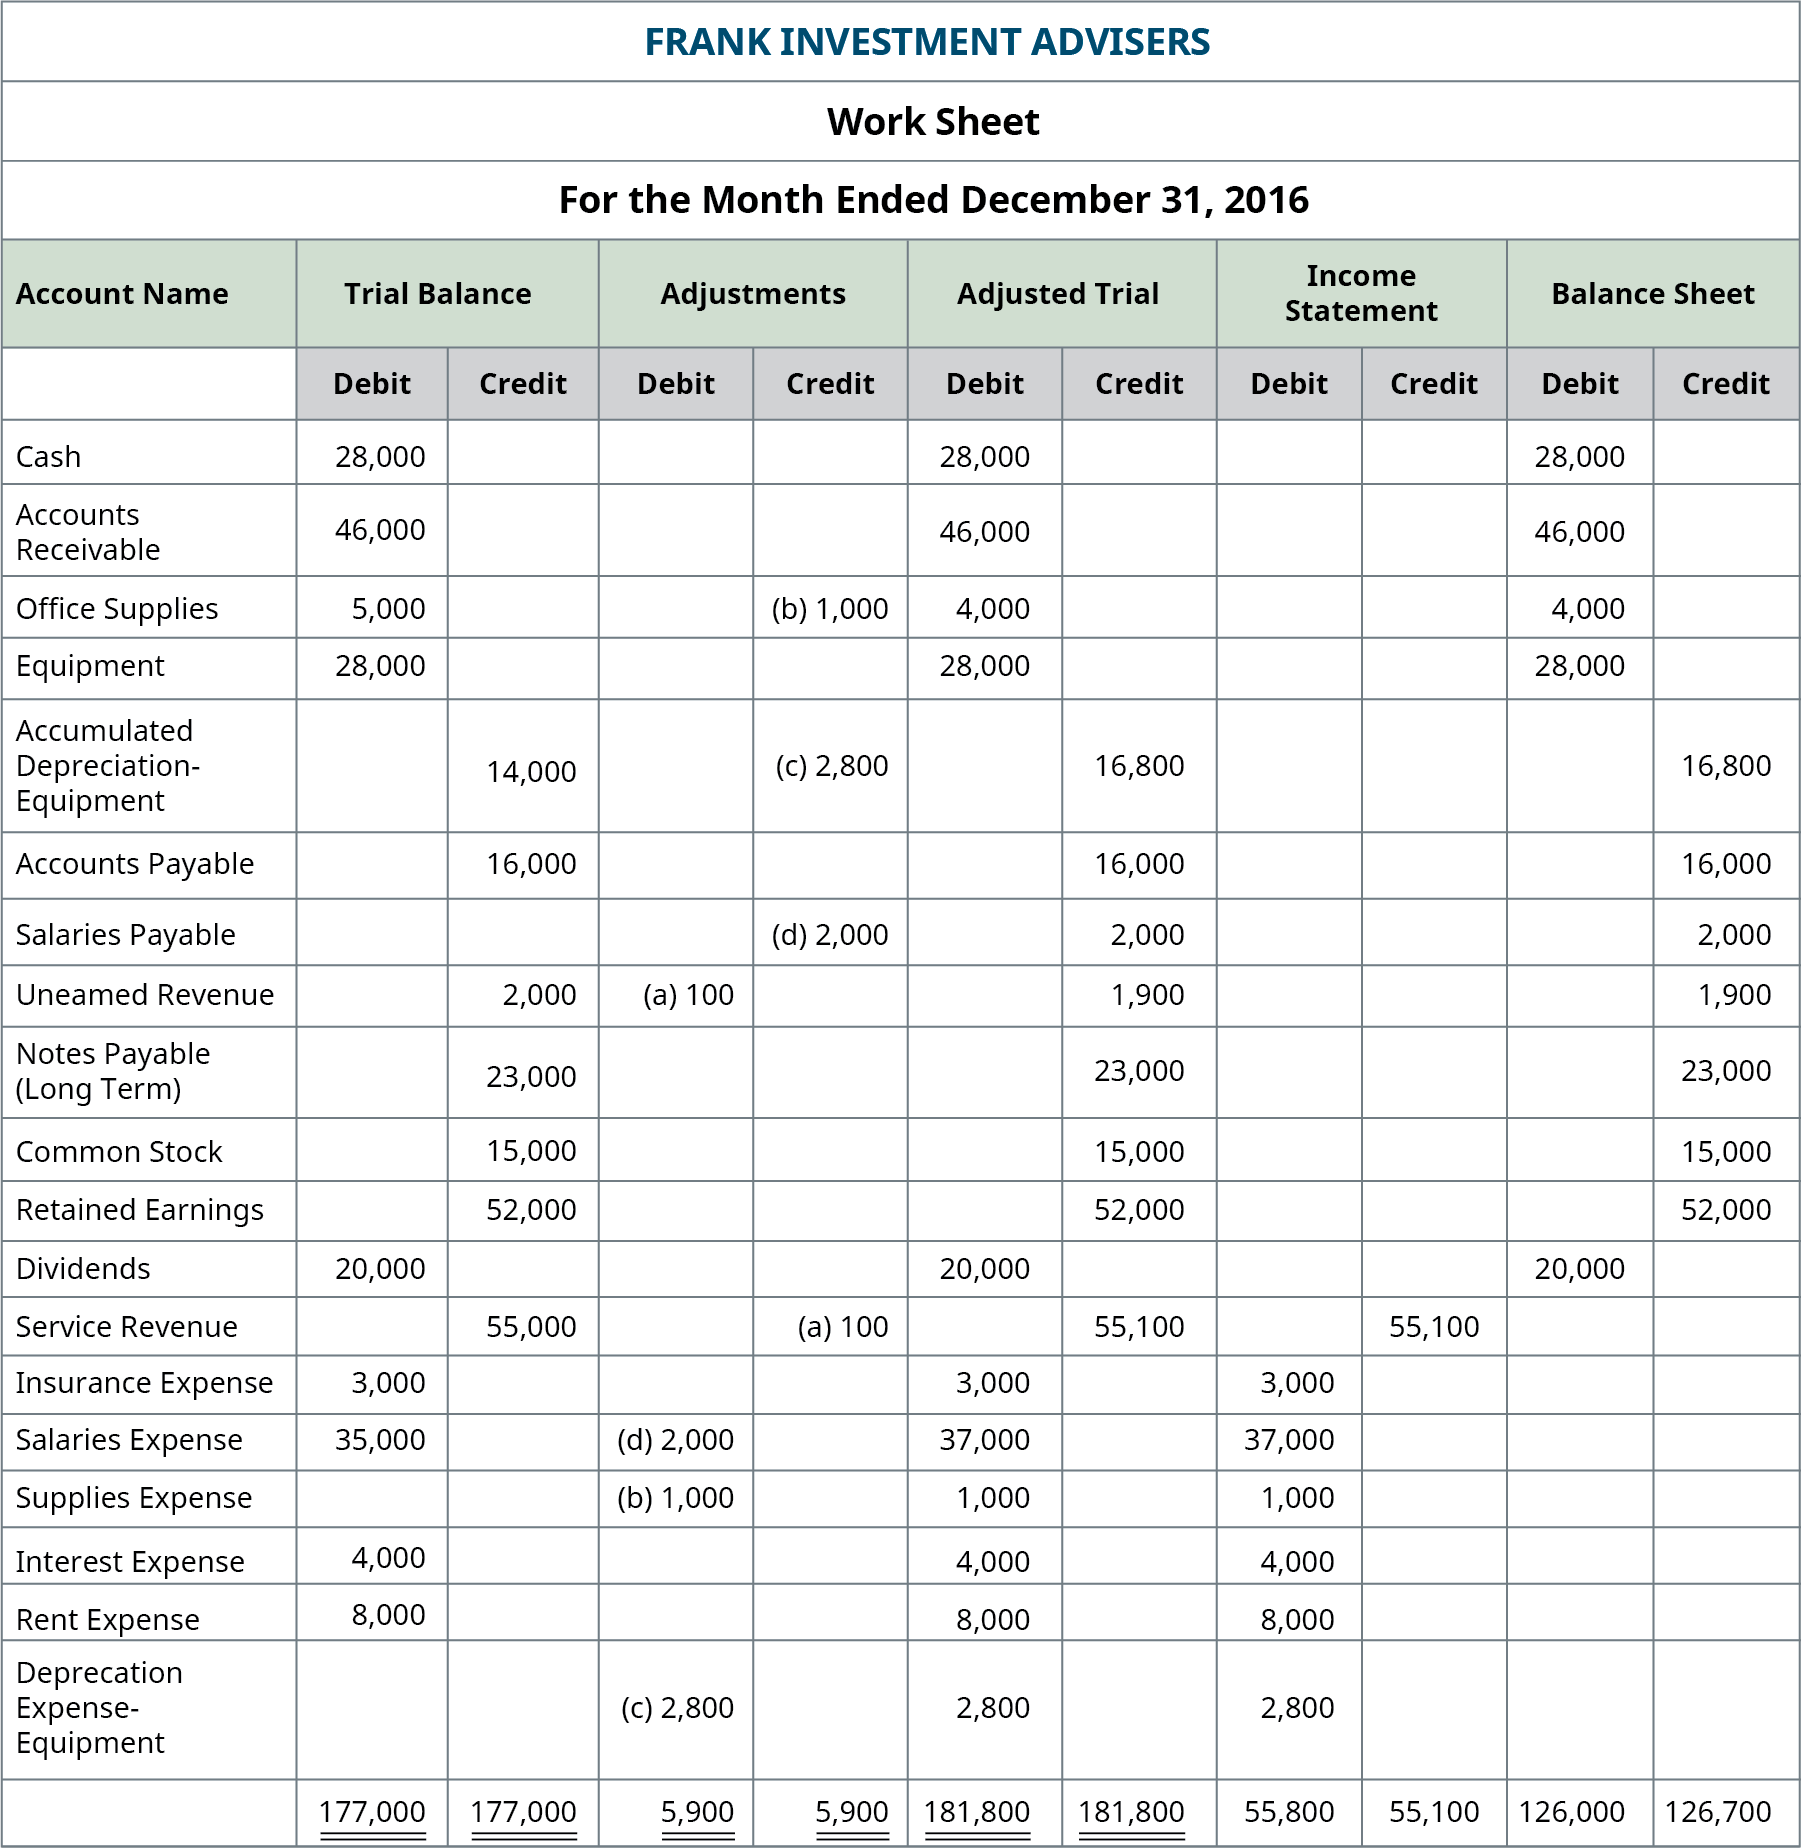 Frank Investment Advisers, Worksheet, December 31, 2016. Income Statement columns. Debit column: Insurance expense 3,000; Salaries expense 37,000, Supplies expense 1,000; Interest expense 4,000; Rent expense 8,000; Depreciation expense: equipment 2,800; total debit column 55,800. Credit column: Service revenue 55,100; total credit column 55,100. Balance Sheet columns. Debit column: Cash 28,000; Accounts receivable 46,000; Office supplies 4,000; Equipment 28,000; Dividends 20,000; total debit column 126,000. Credit column: Accumulated depreciation: equipment 16,800; Accounts payable 16,000; Salaries payable 2,000; Unearned revenue 1,900; Notes Payable (long term) 23,000; Common stock 15,000; Retained earnings 52,000; total credit column 126,700.